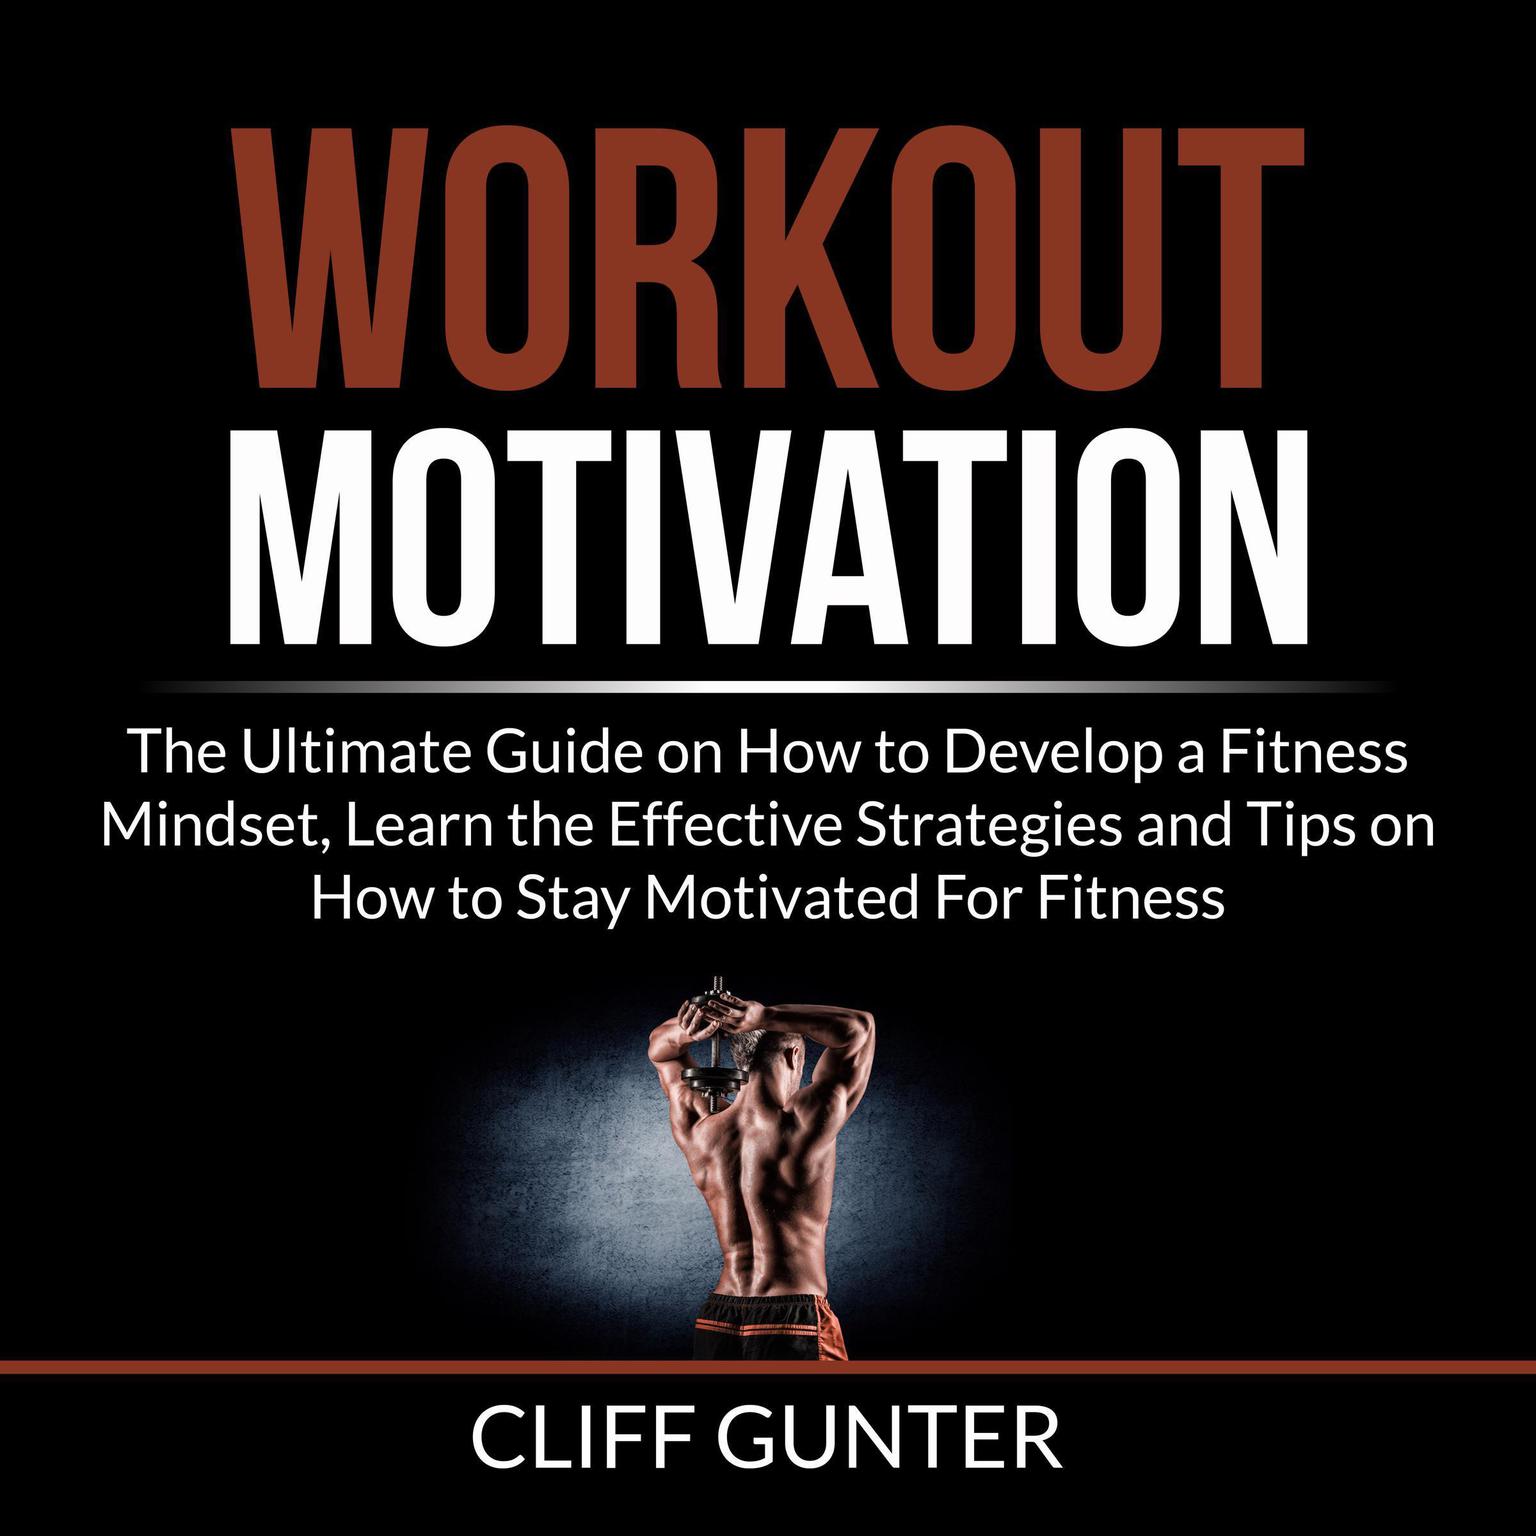 Workout Motivation: The Ultimate Guide on How to Develop a Fitness Mindset, Learn the Effective Strategies and Tips on How to Stay Motivated For Fitness Audiobook, by Cliff Gunter